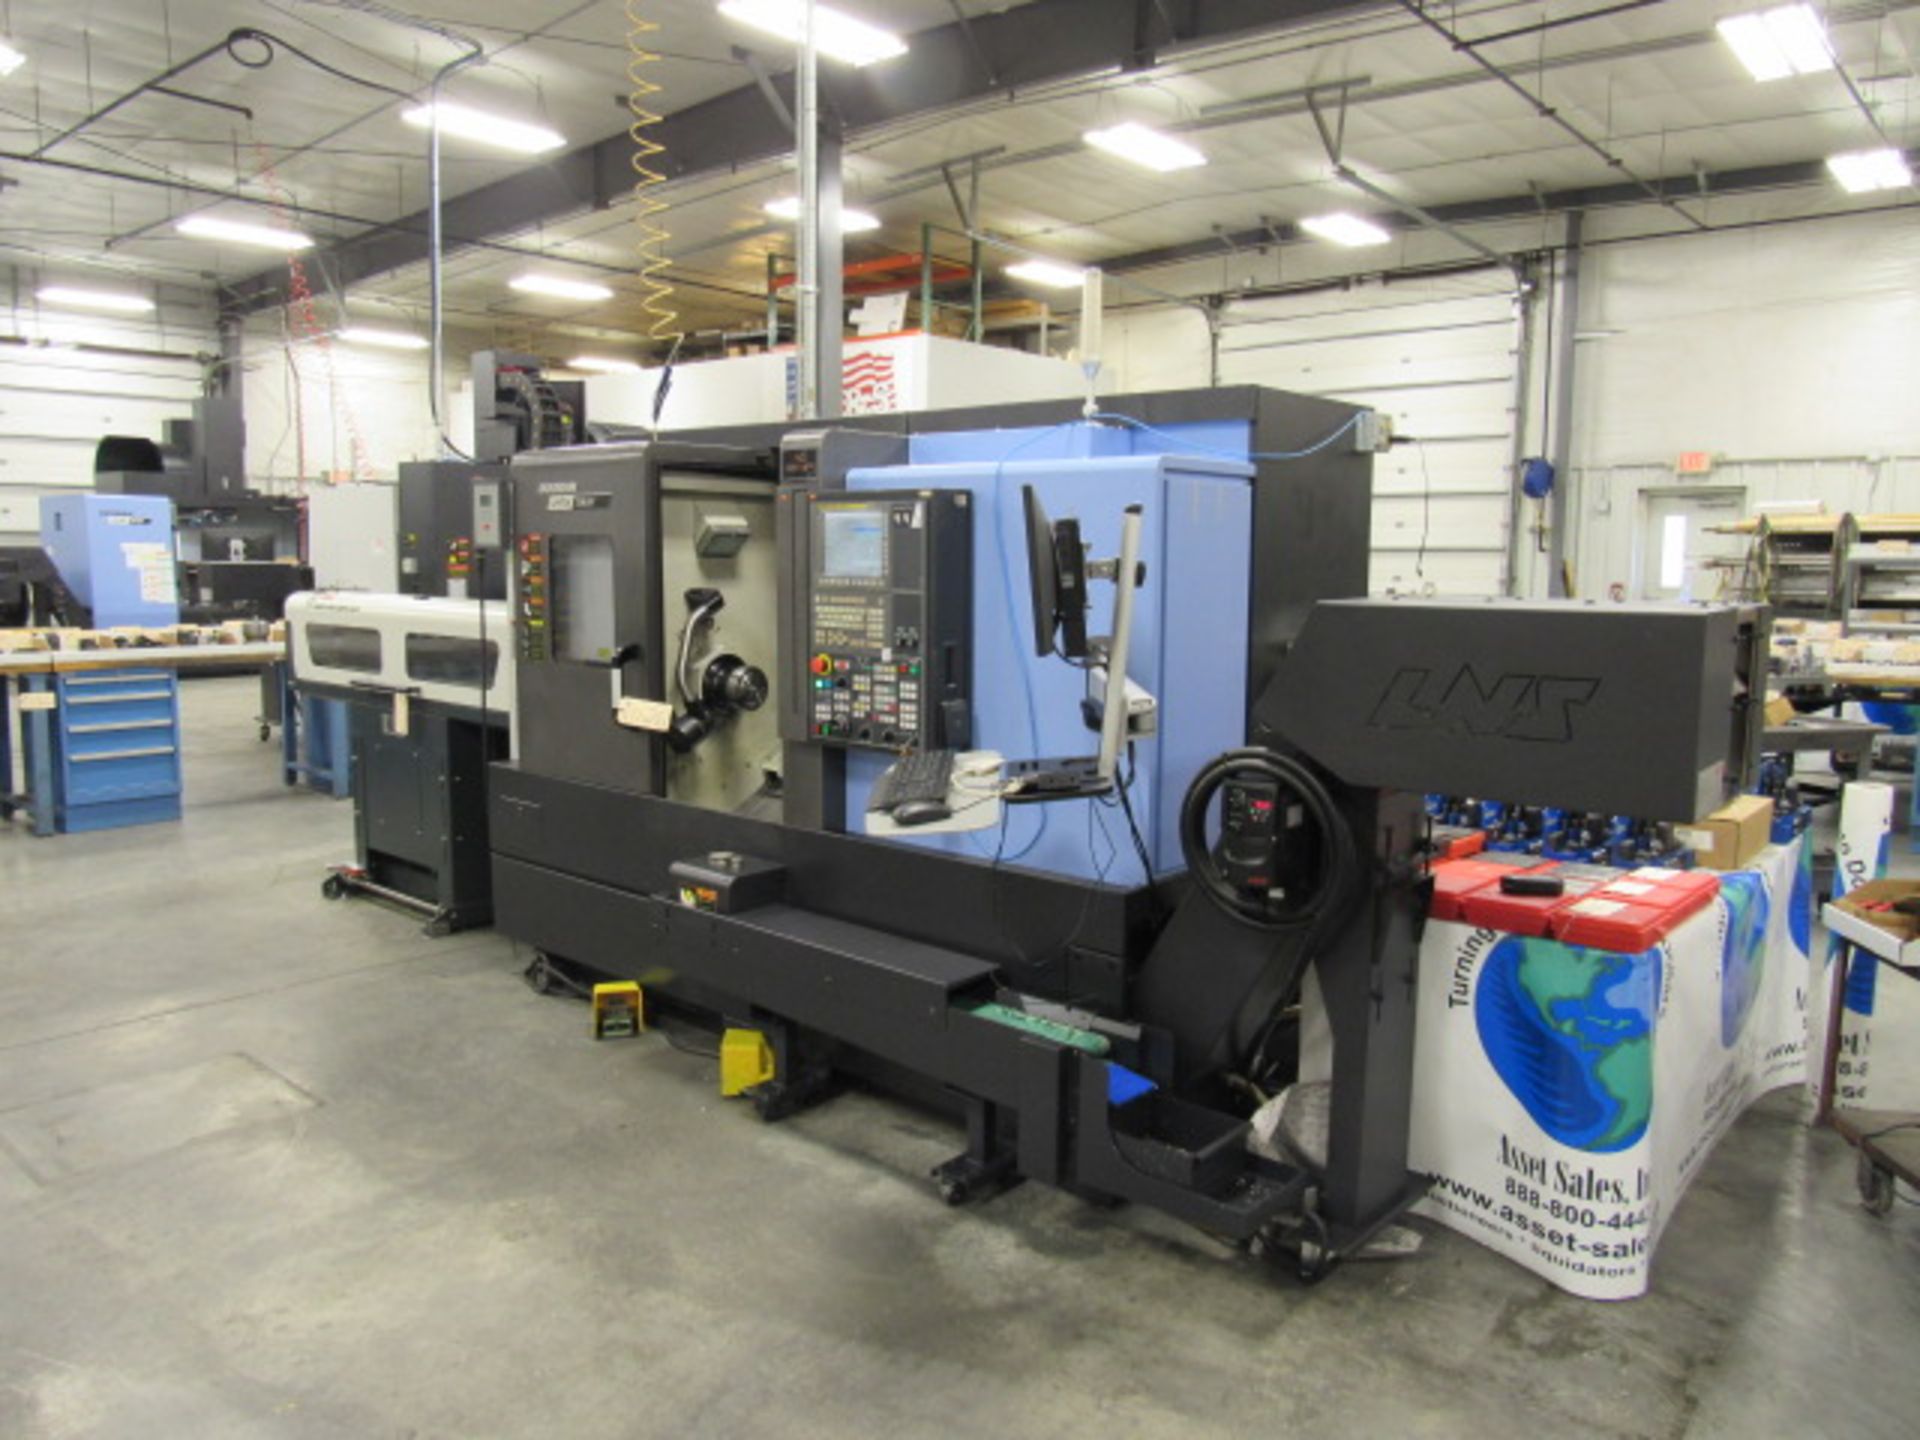 Doosan Lynx 220LSY CNC Turning Center with Sub Spindle, Y-Axis, & Live Milling, Collet Chuck (Main), - Image 5 of 8